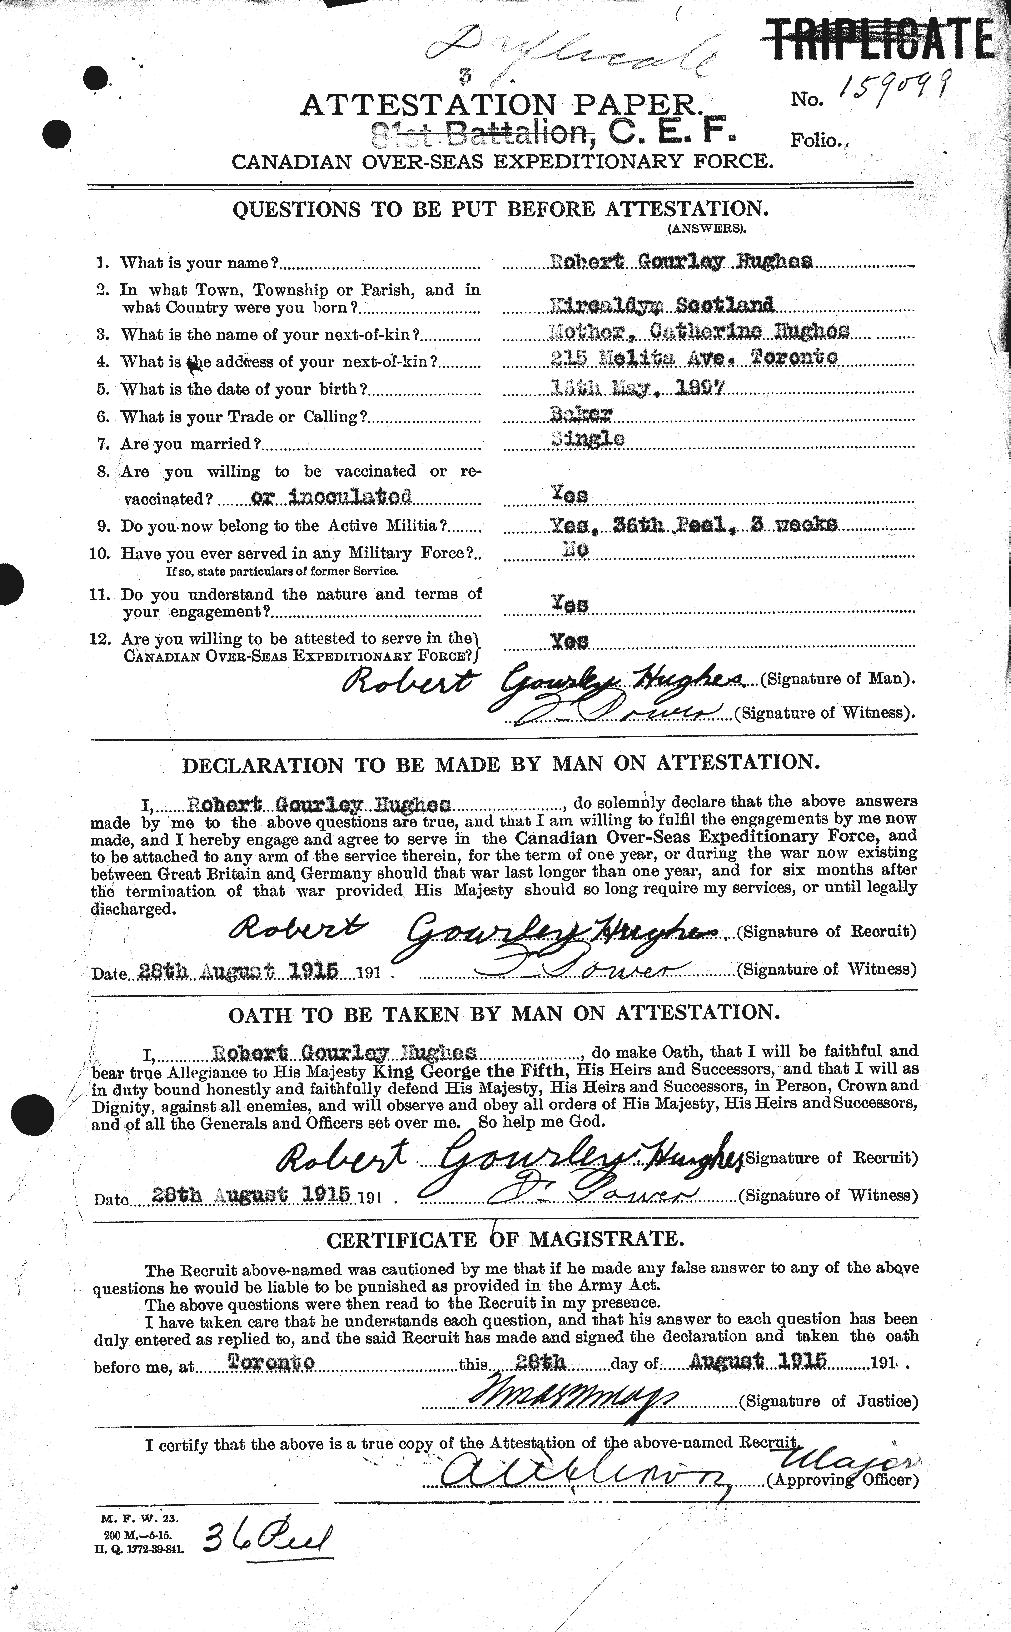 Personnel Records of the First World War - CEF 406612a